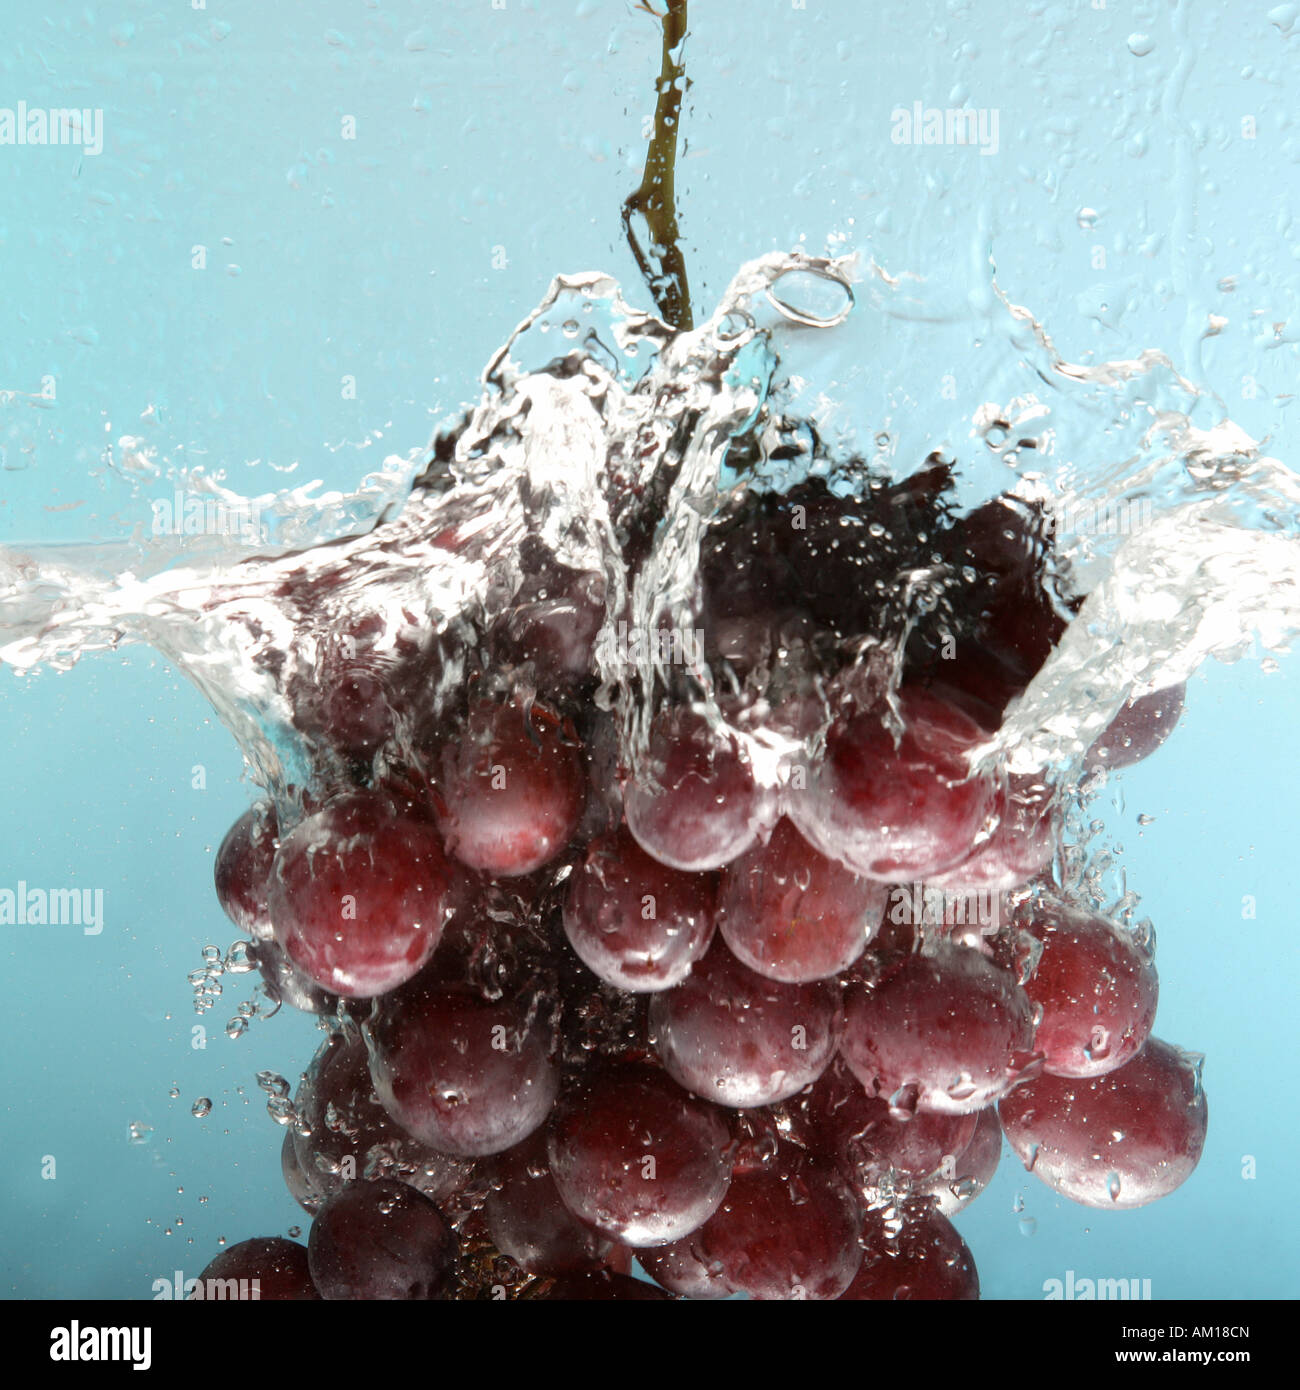 Bunch of grapes falling into water Stock Photo